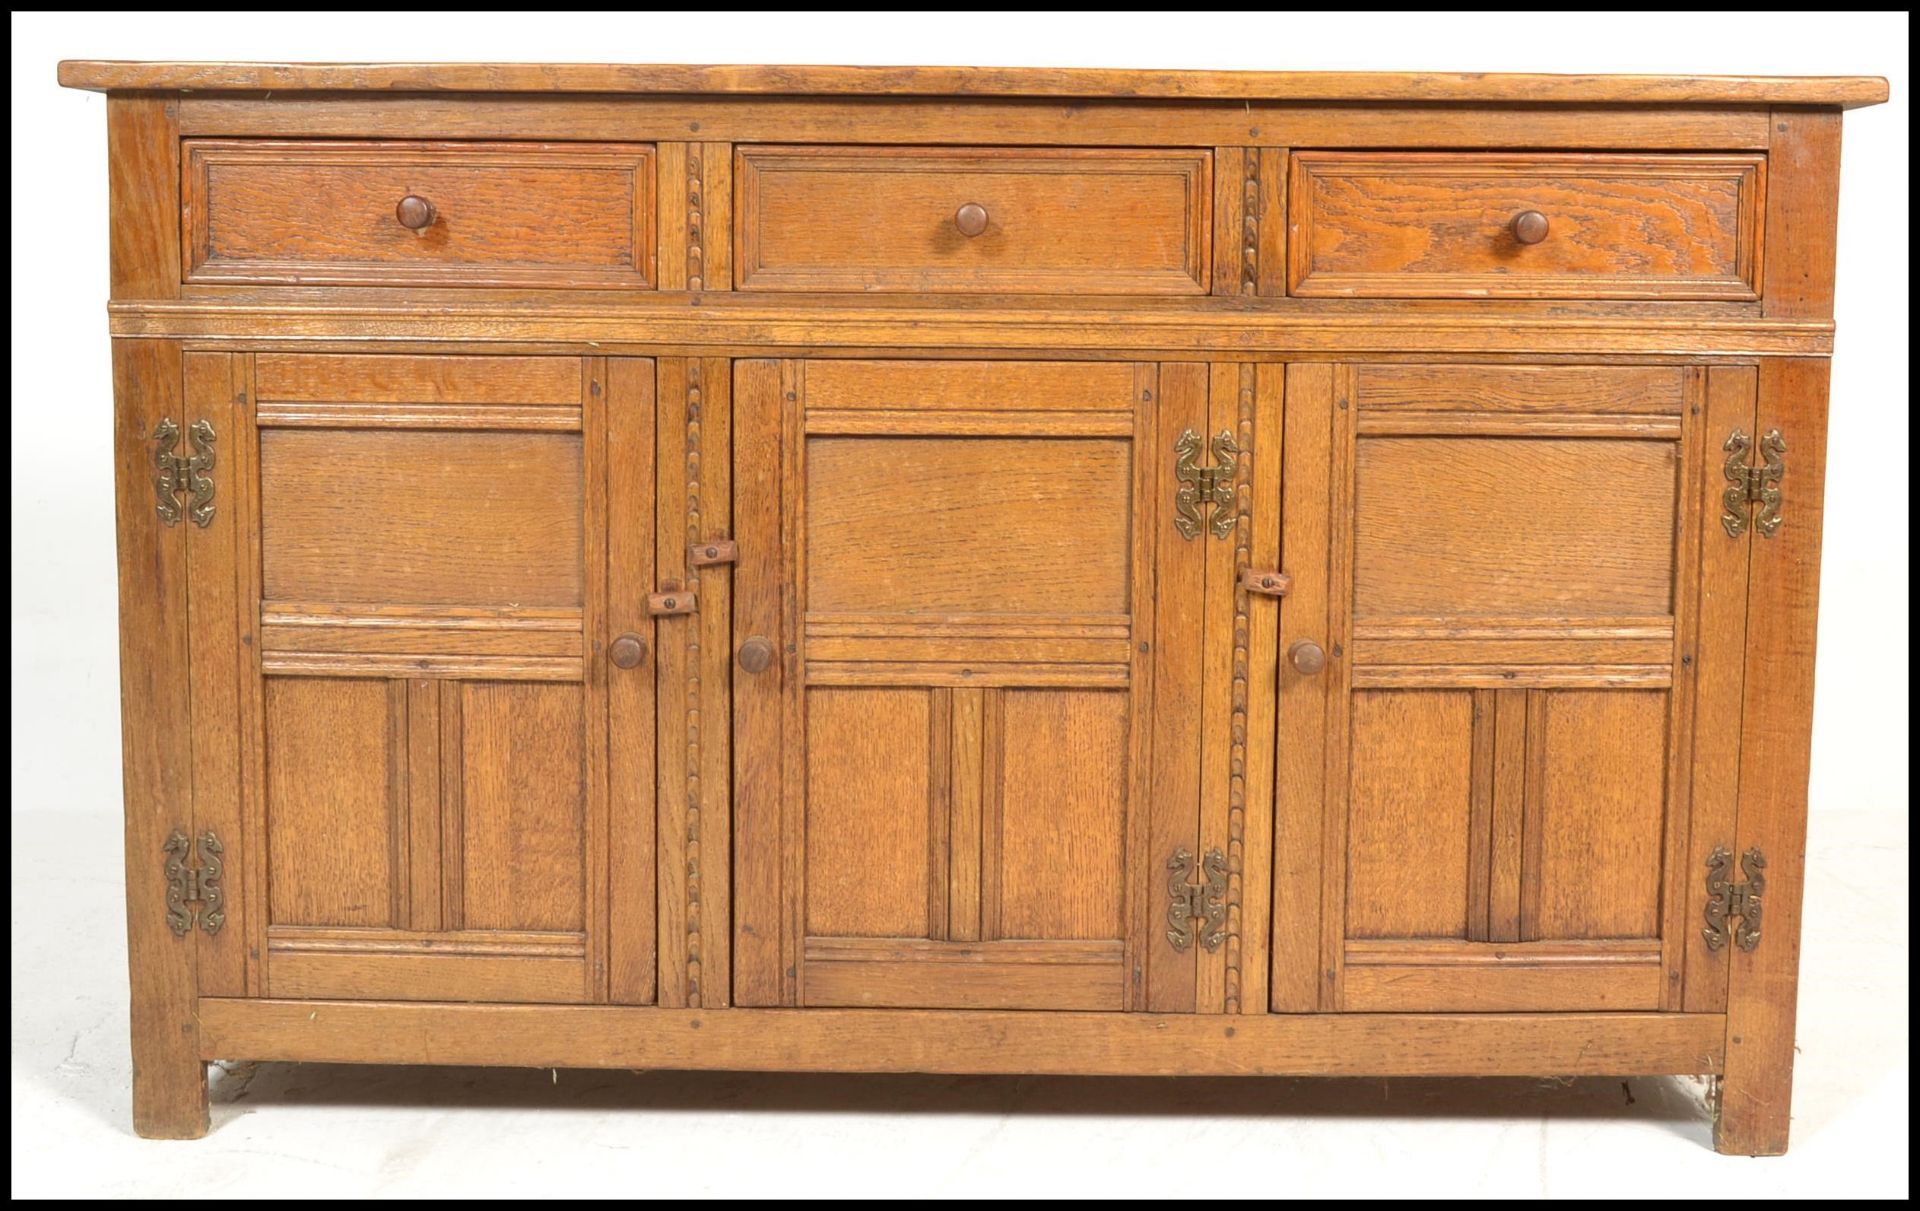 A 20th Century oak Jacobean revival sideboard credenza, flared top over a configuration of drawers - Image 2 of 6